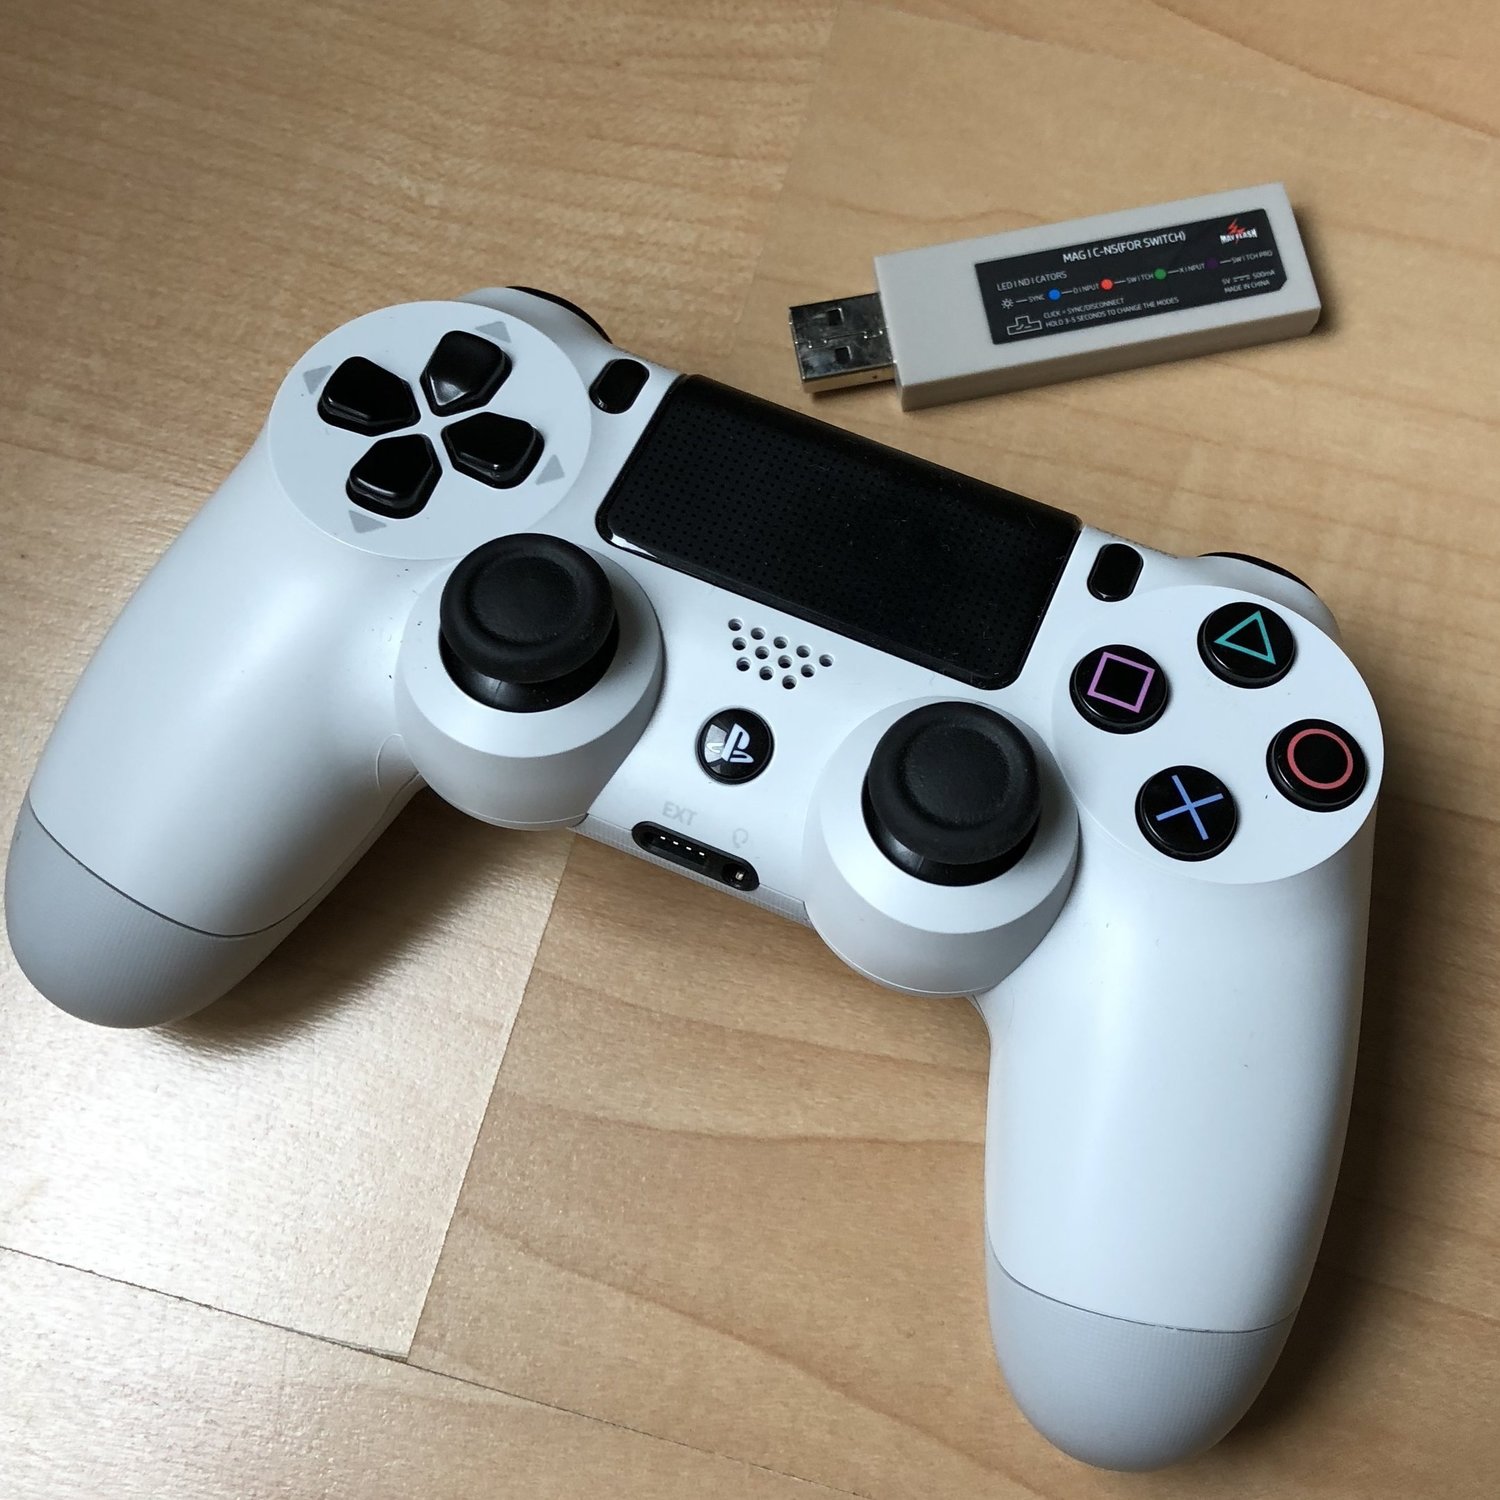 connect ps4 controller to xbox one